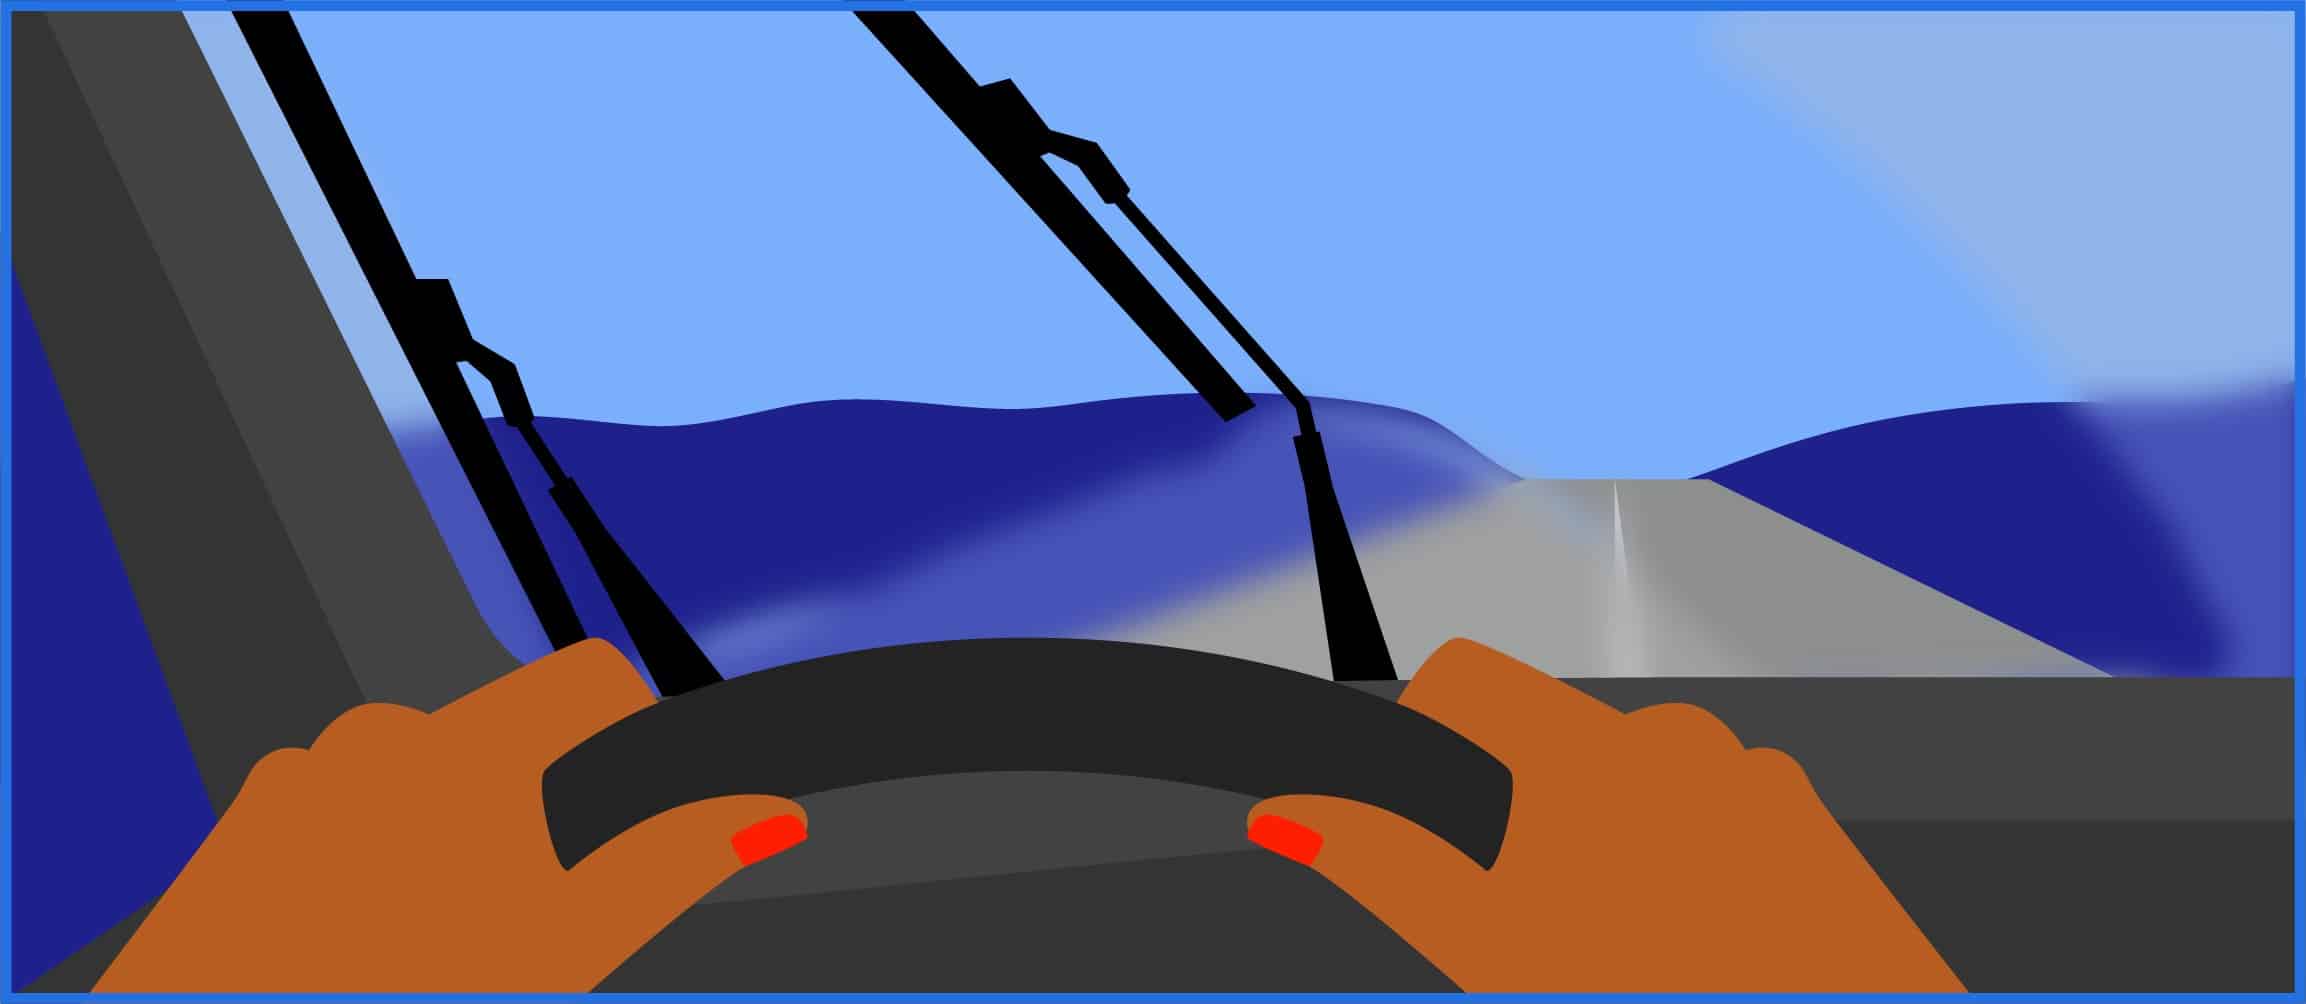 What Is a Windshield Wiper and What Purpose Does It Serve?